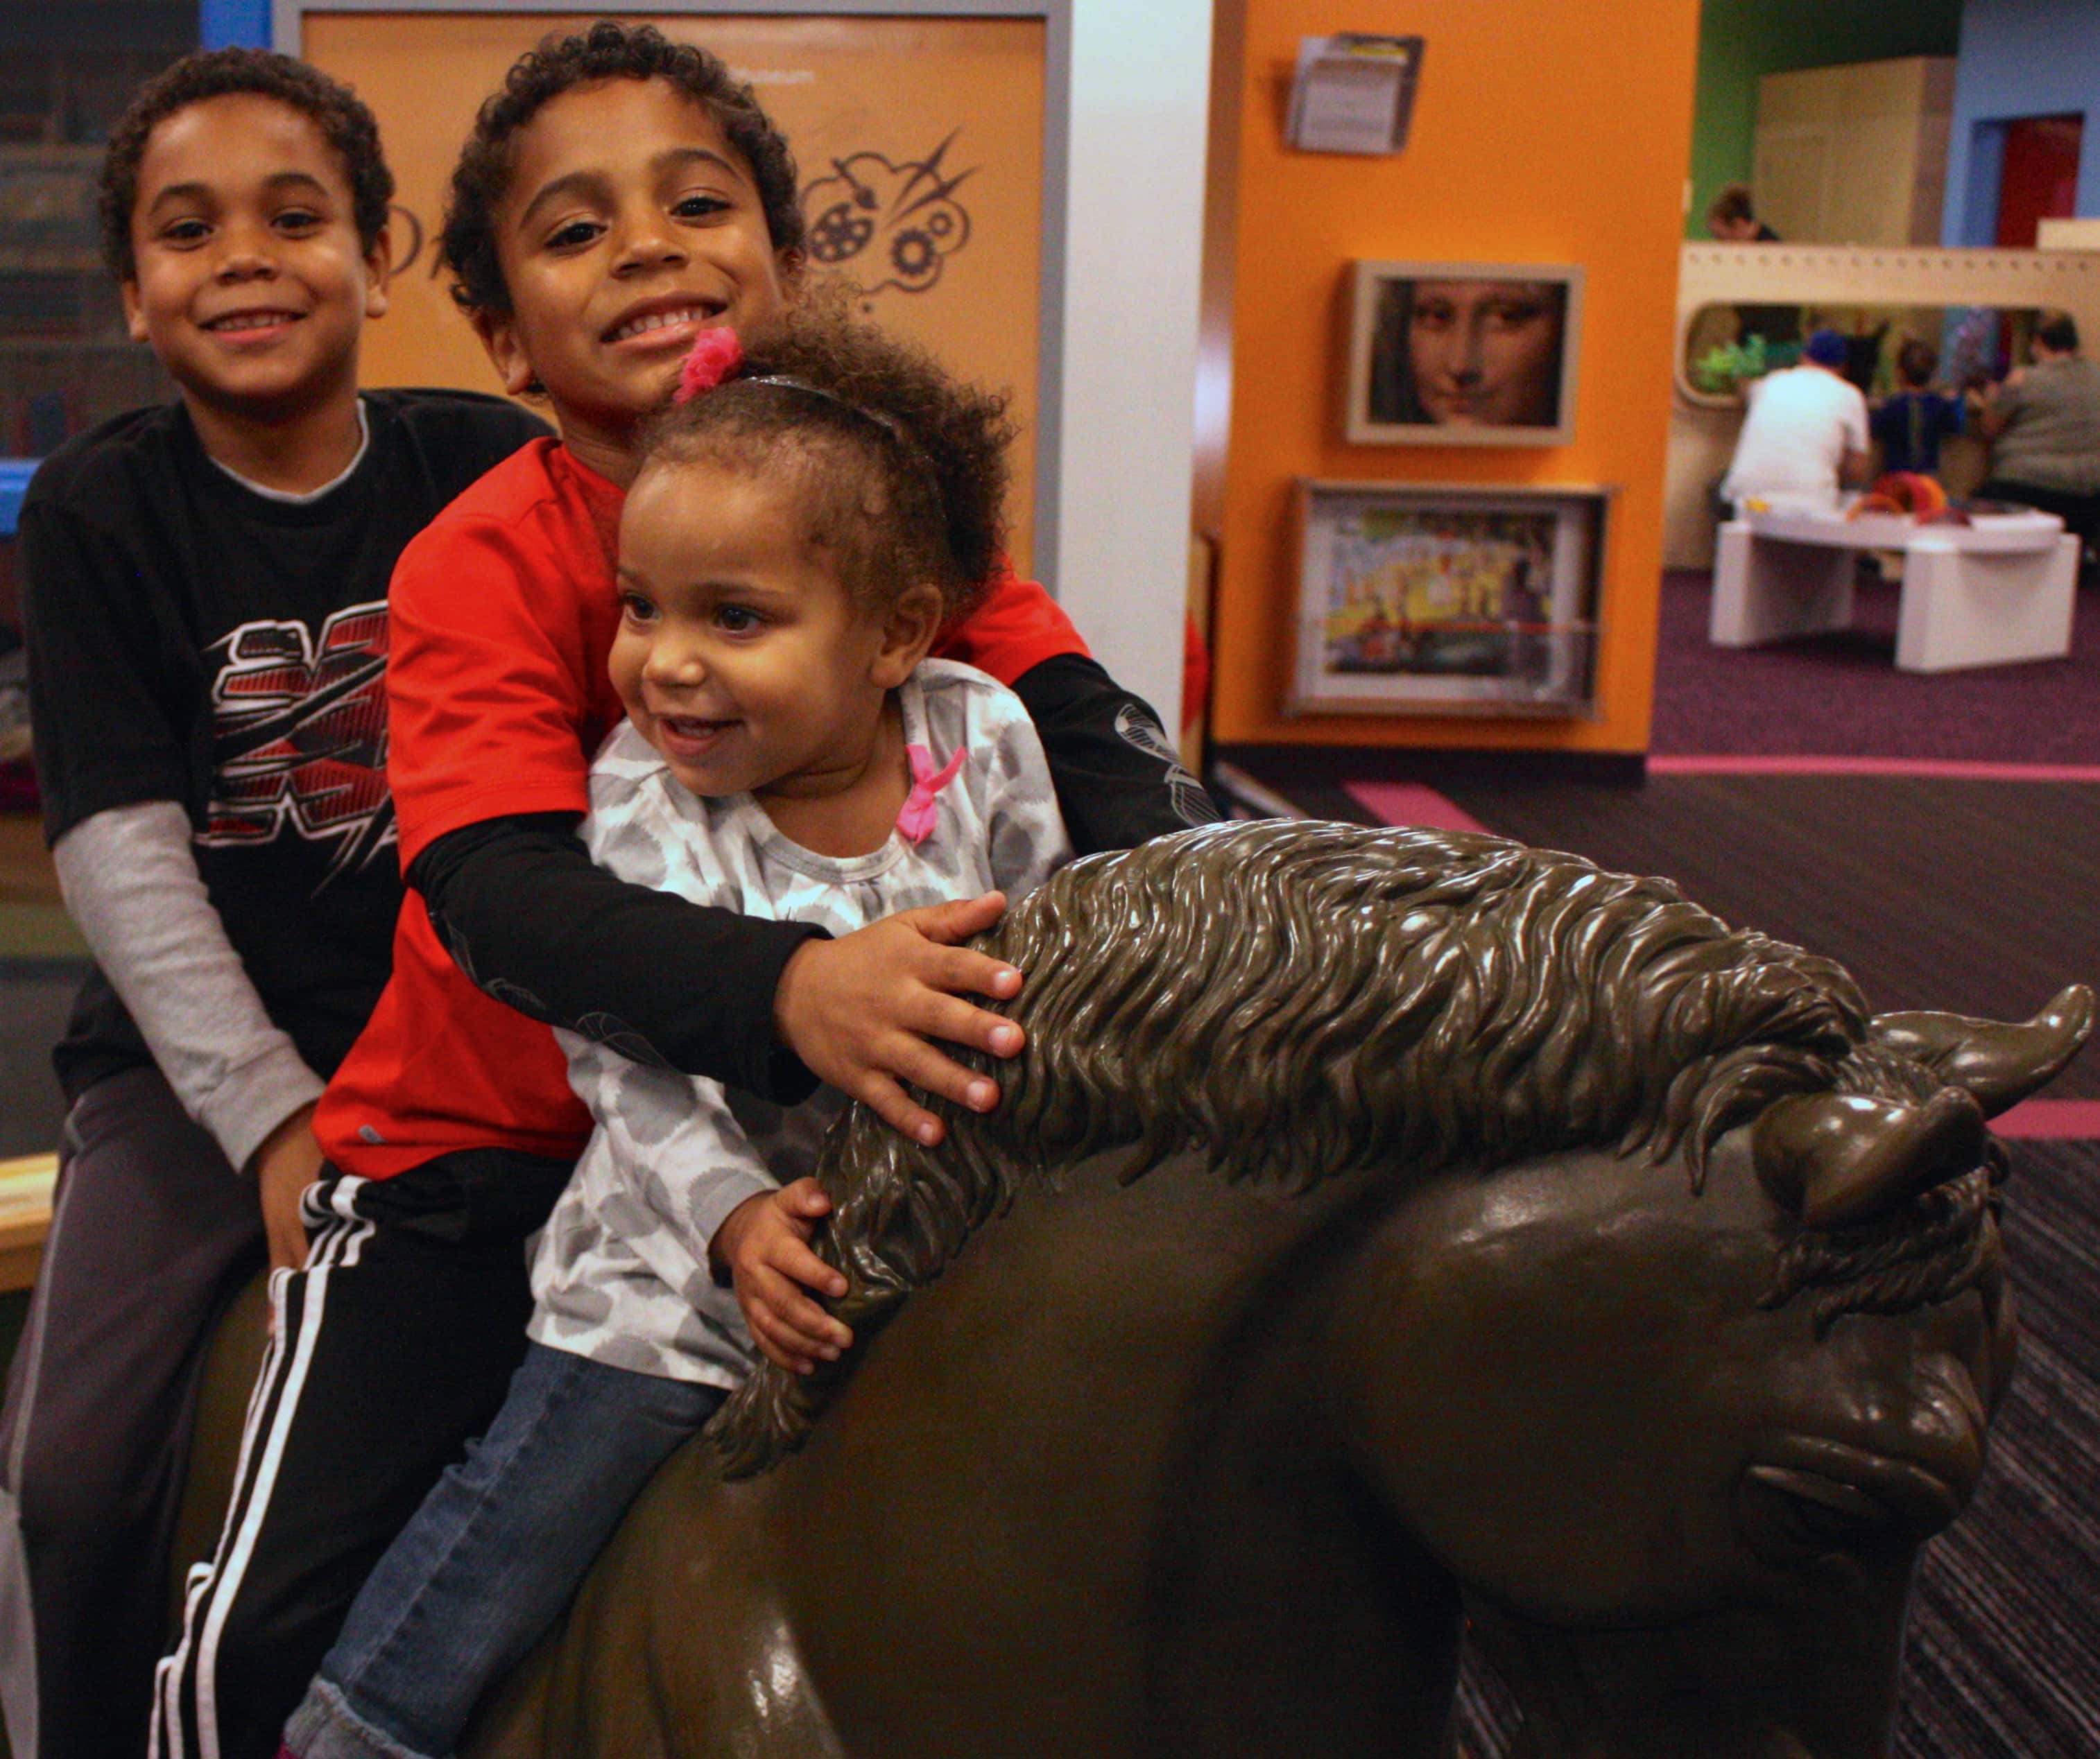 Dream with Da Vinci at the DuPage Children's Museum